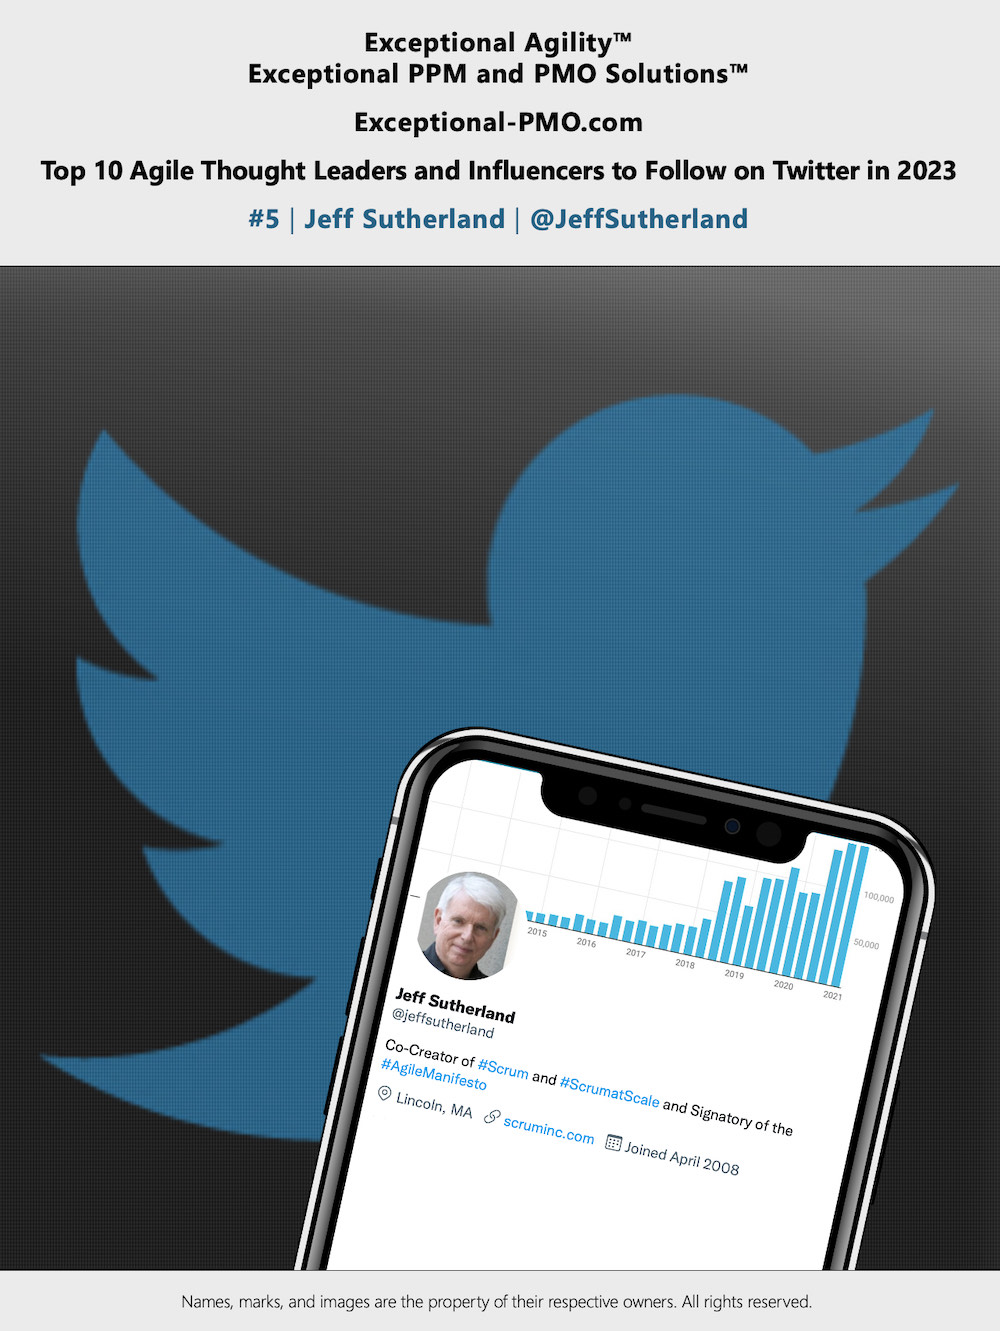 Exceptional-PMO_com - Top 10 Agile Thought Leaders and Influencers to Follow on Twitter in 2023 - 05 - lr - sq